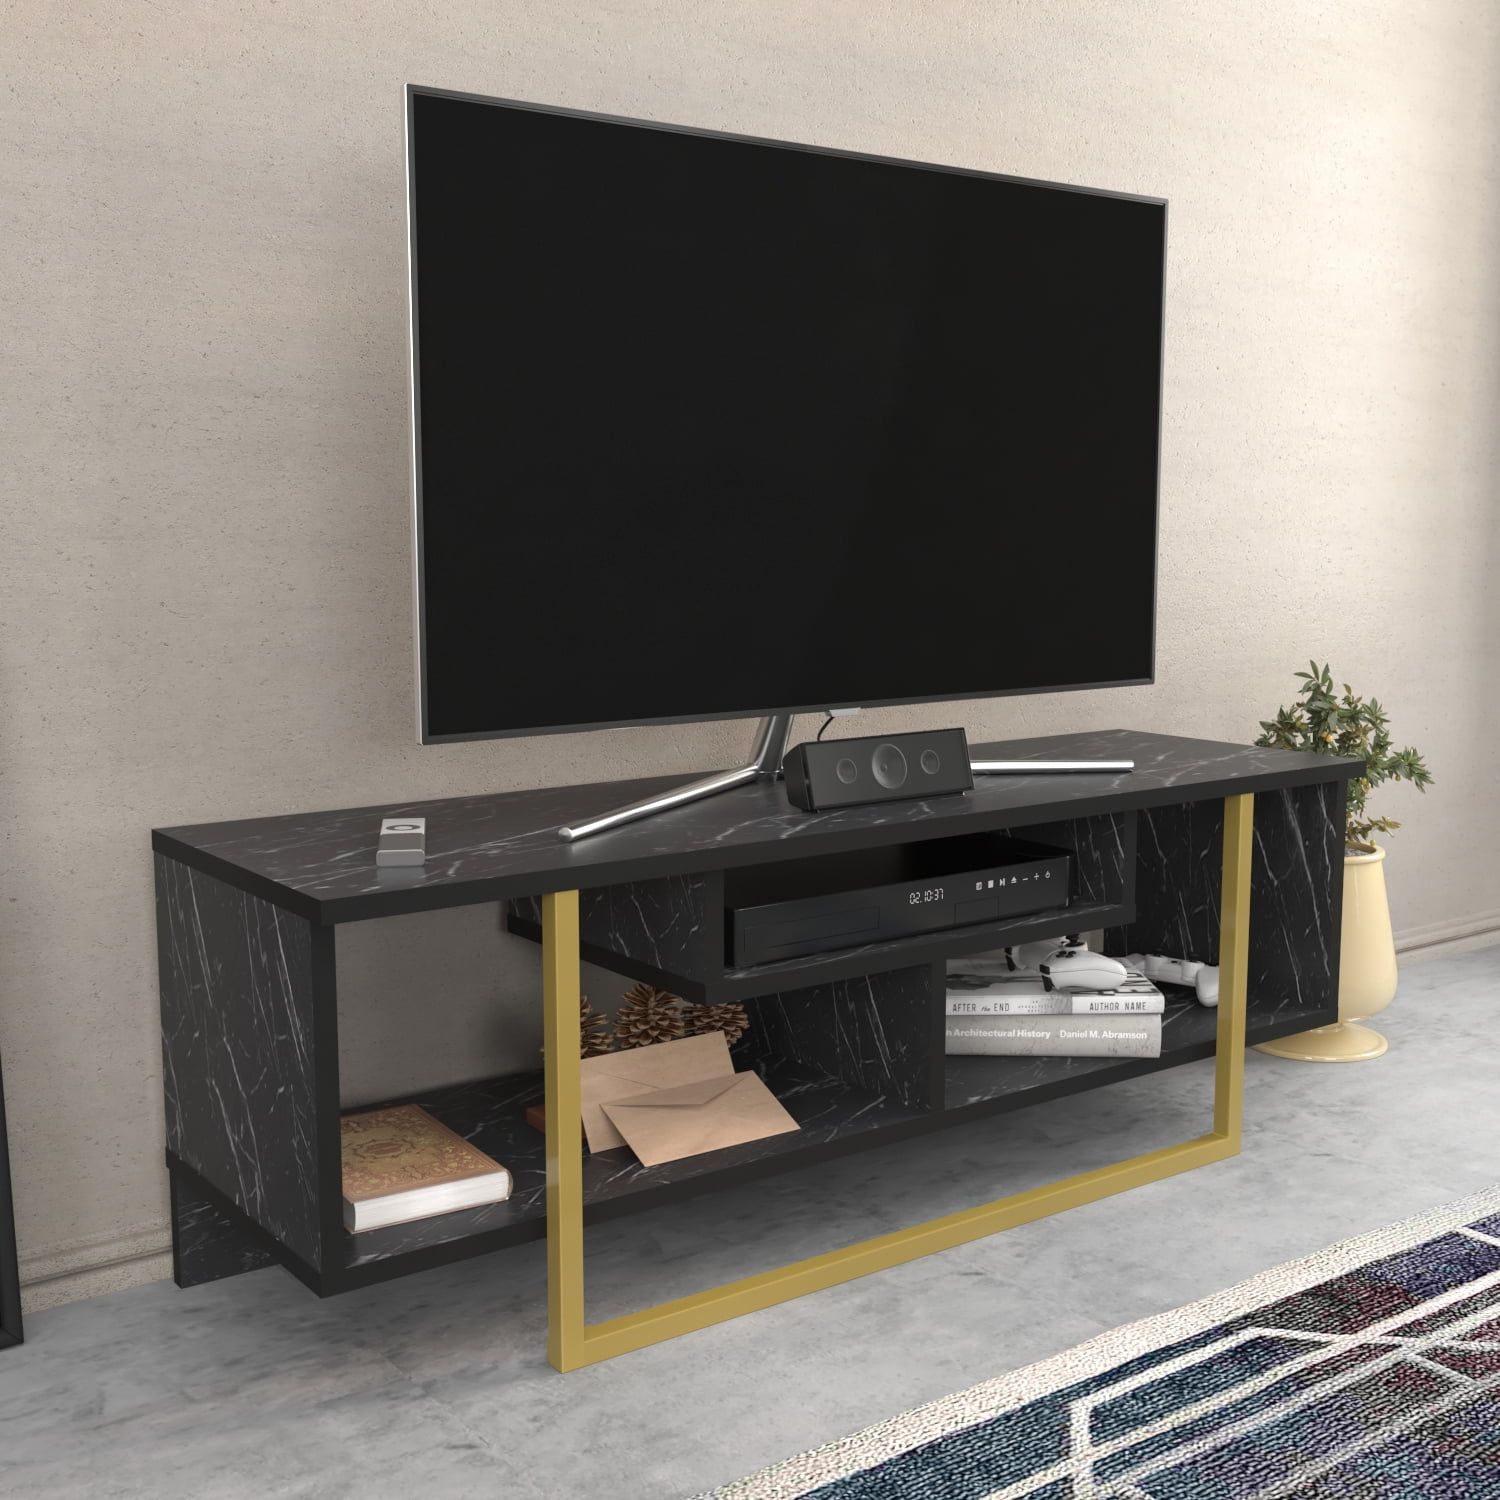 Asal 47" Modern Metal Wood Tv Stand For 55 Inch Tv Black Marble Gold In Black Marble Tv Stands (View 5 of 20)